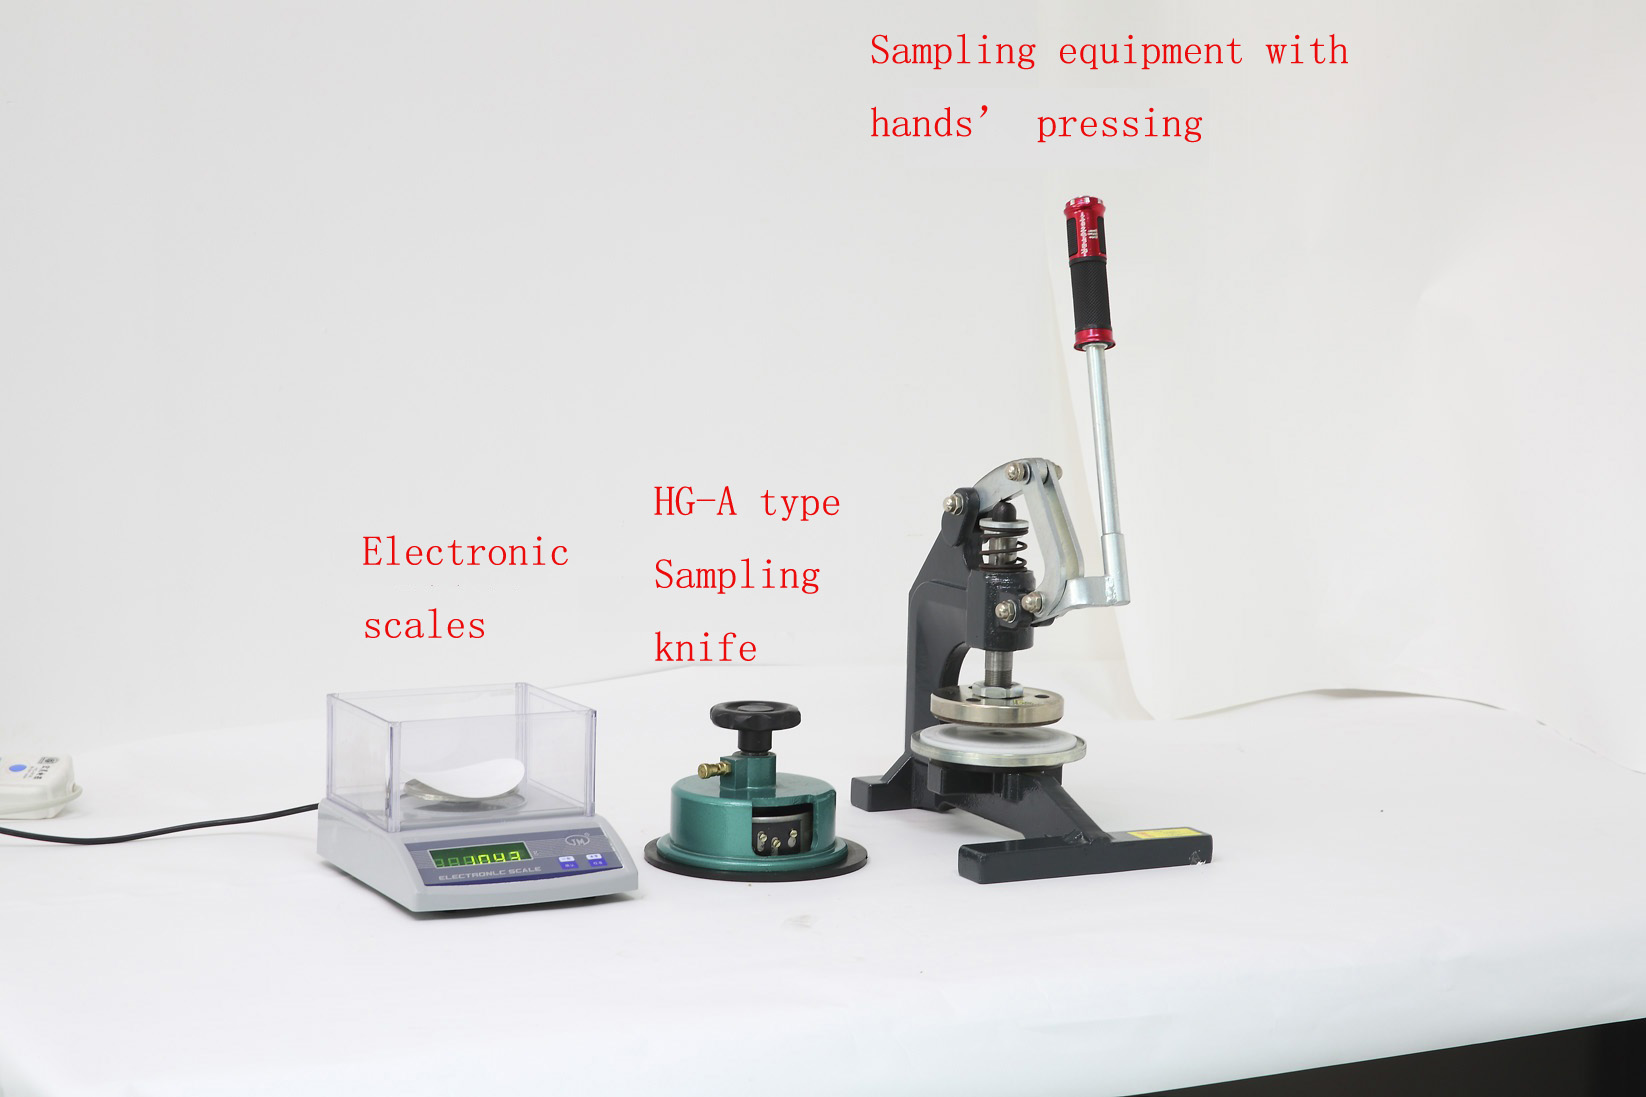 Electronic scales/HG-A type Sampling knife /Sampling equipment with hands’ pressing